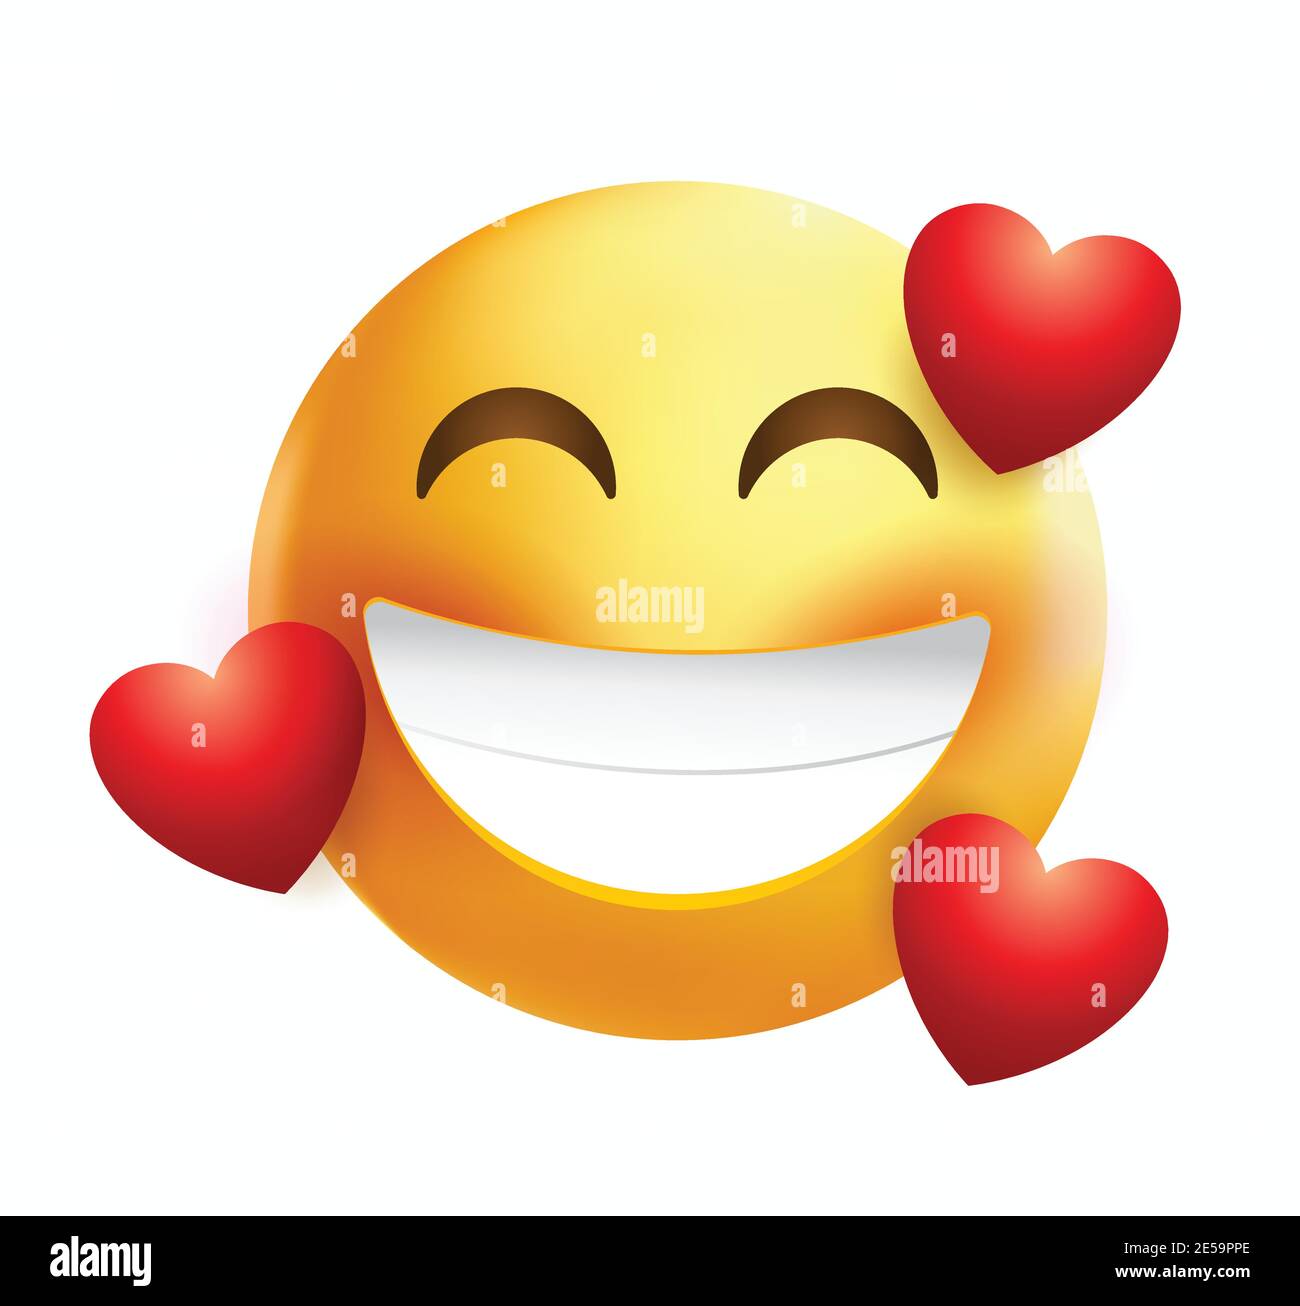 High quality emoticon on white background. Emoji blushing in love with red hearts. Yellow face emoji in love with closed eyes. Popular chat elements. Stock Vector